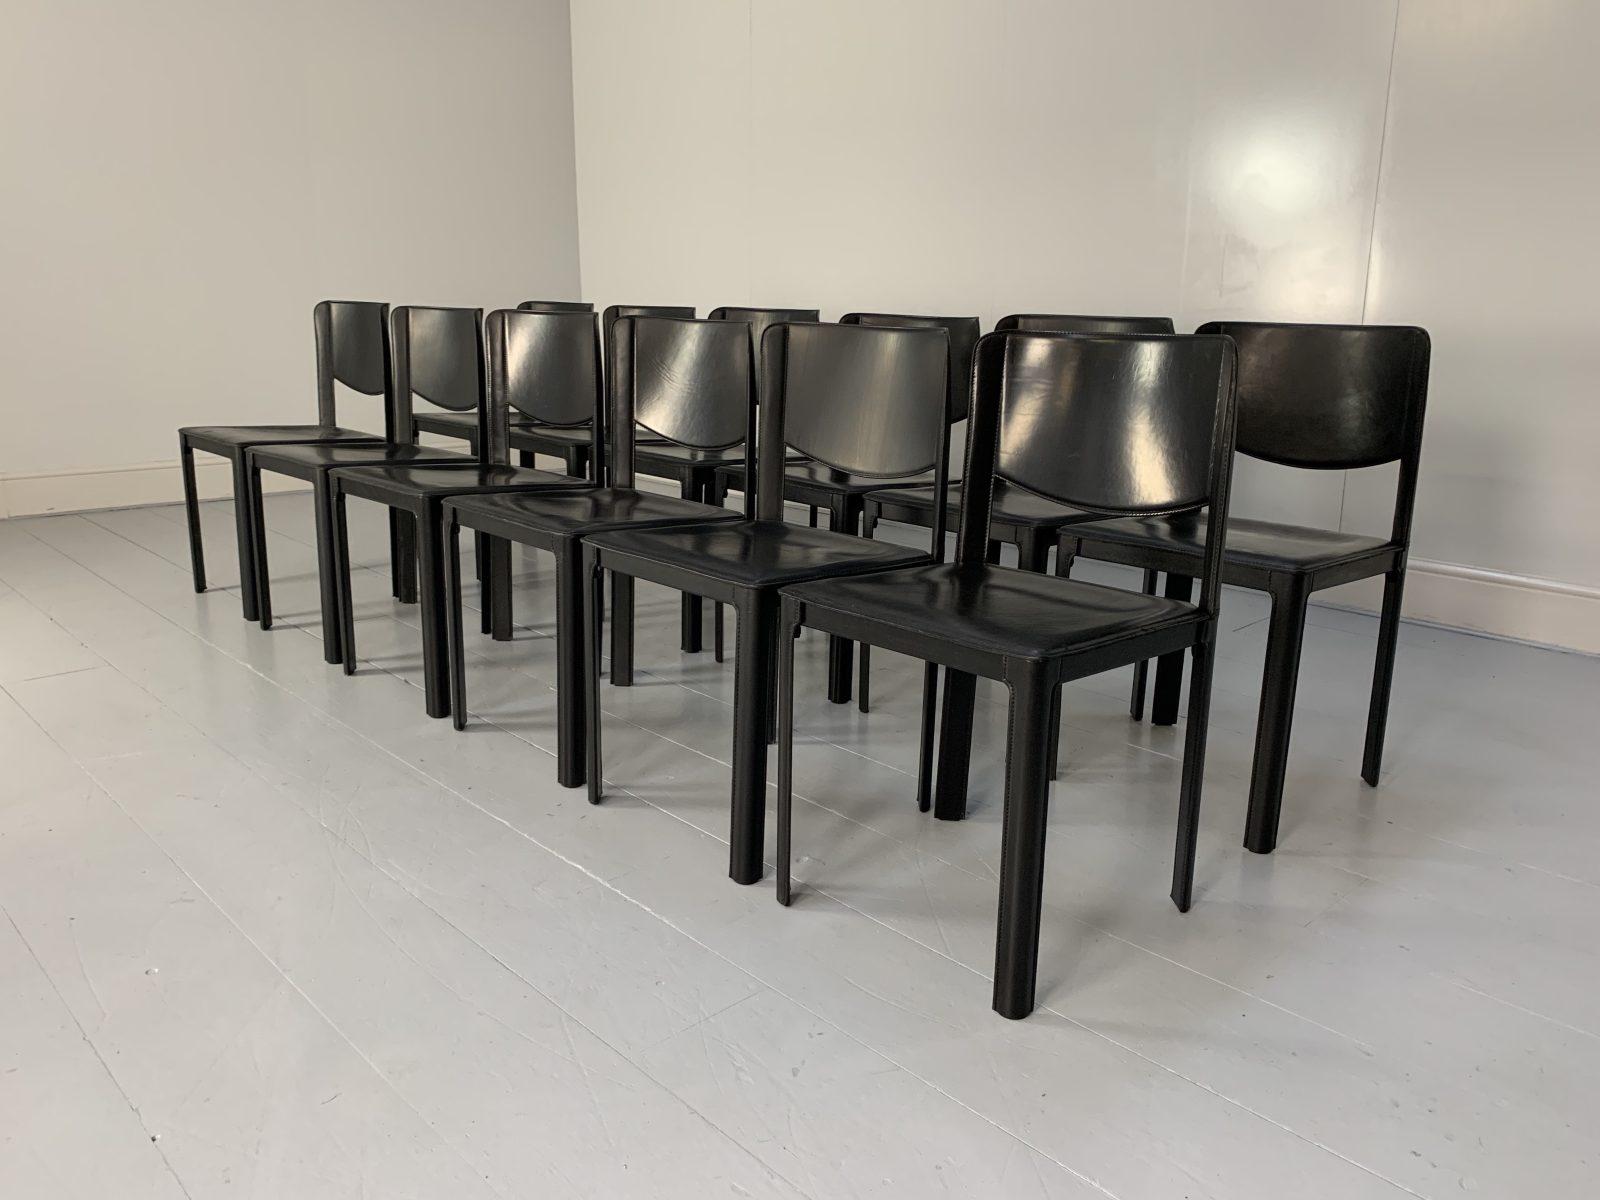 Contemporary 12 Matteo Grassi “Sistina” Dining Chairs, in Black Saddle Leather